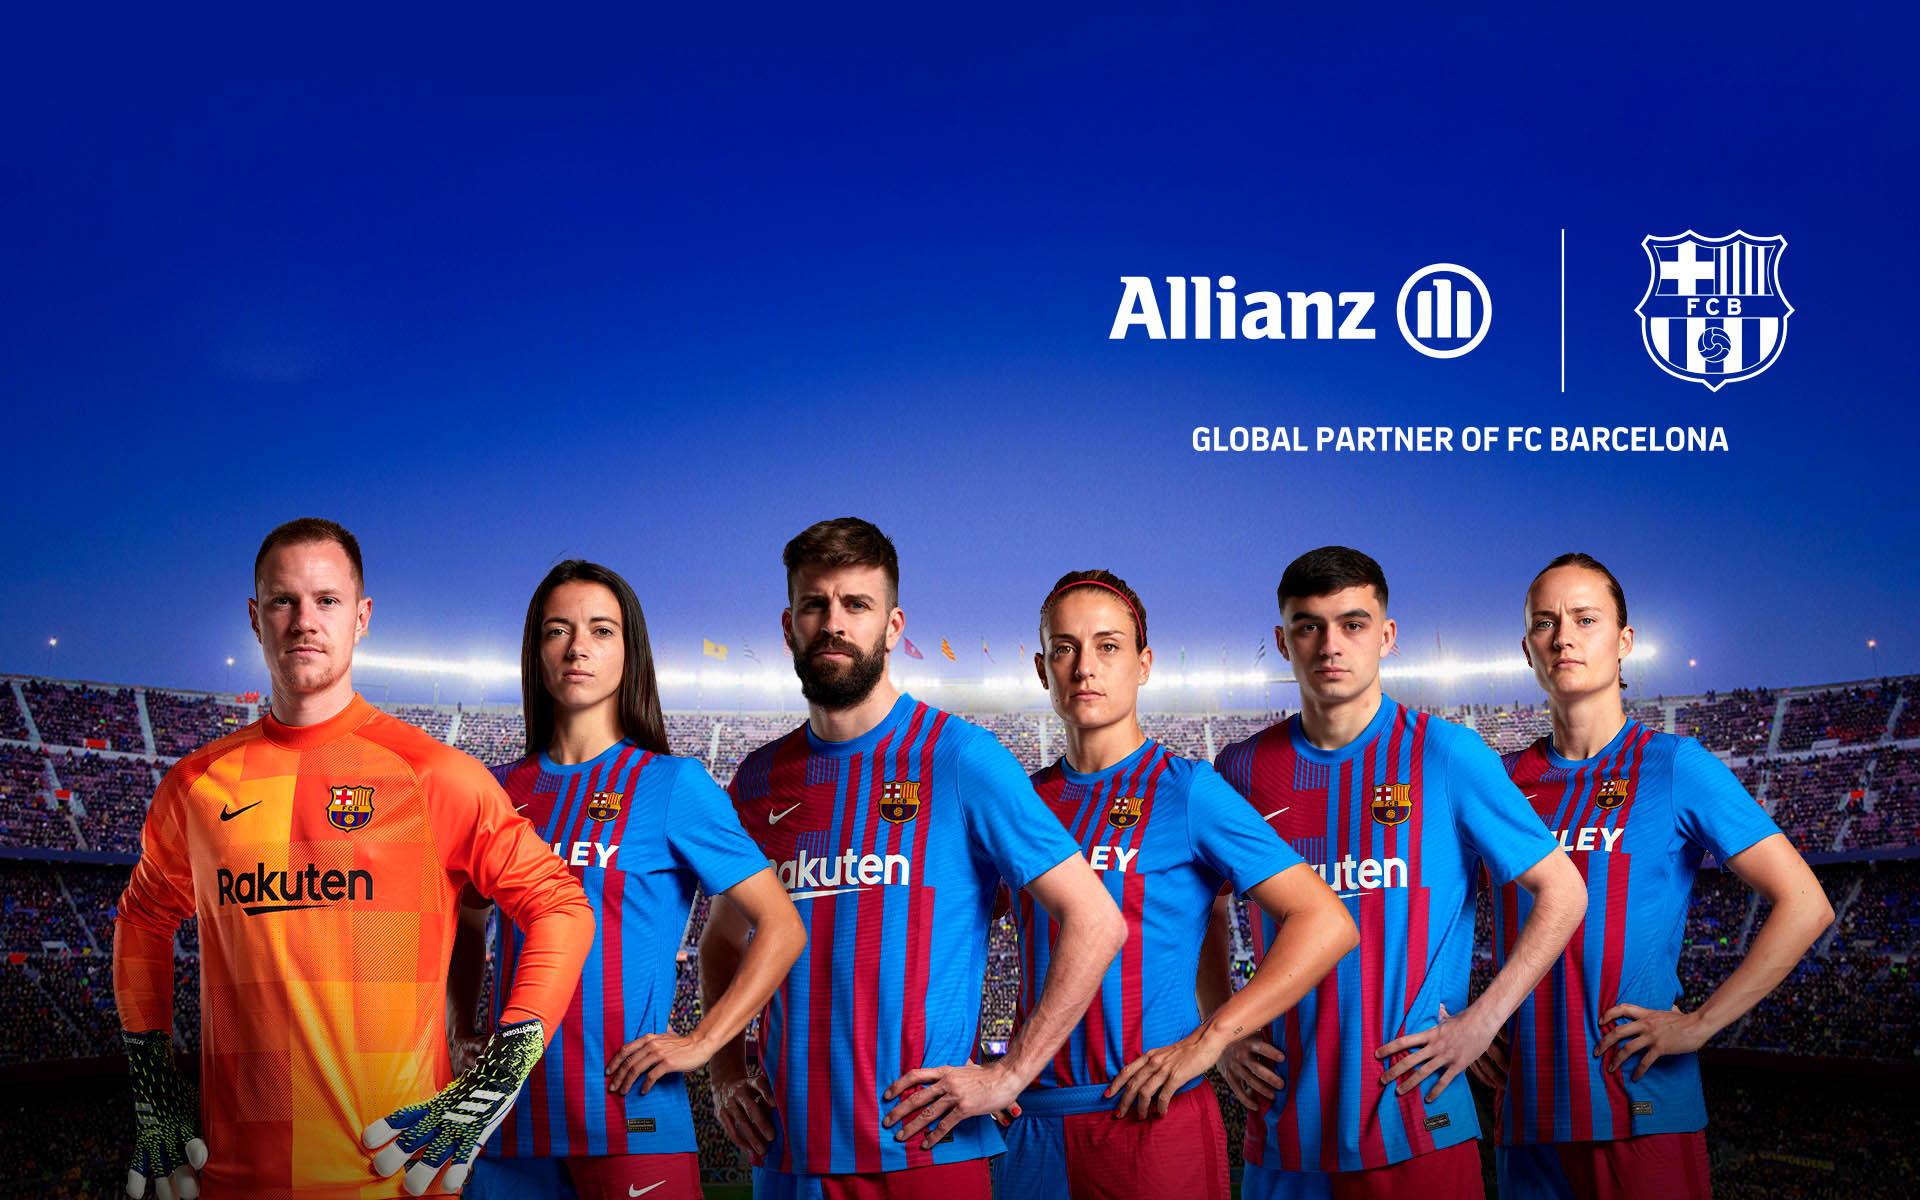 Allianz becomes global partner and extends agreement with Club until 2024